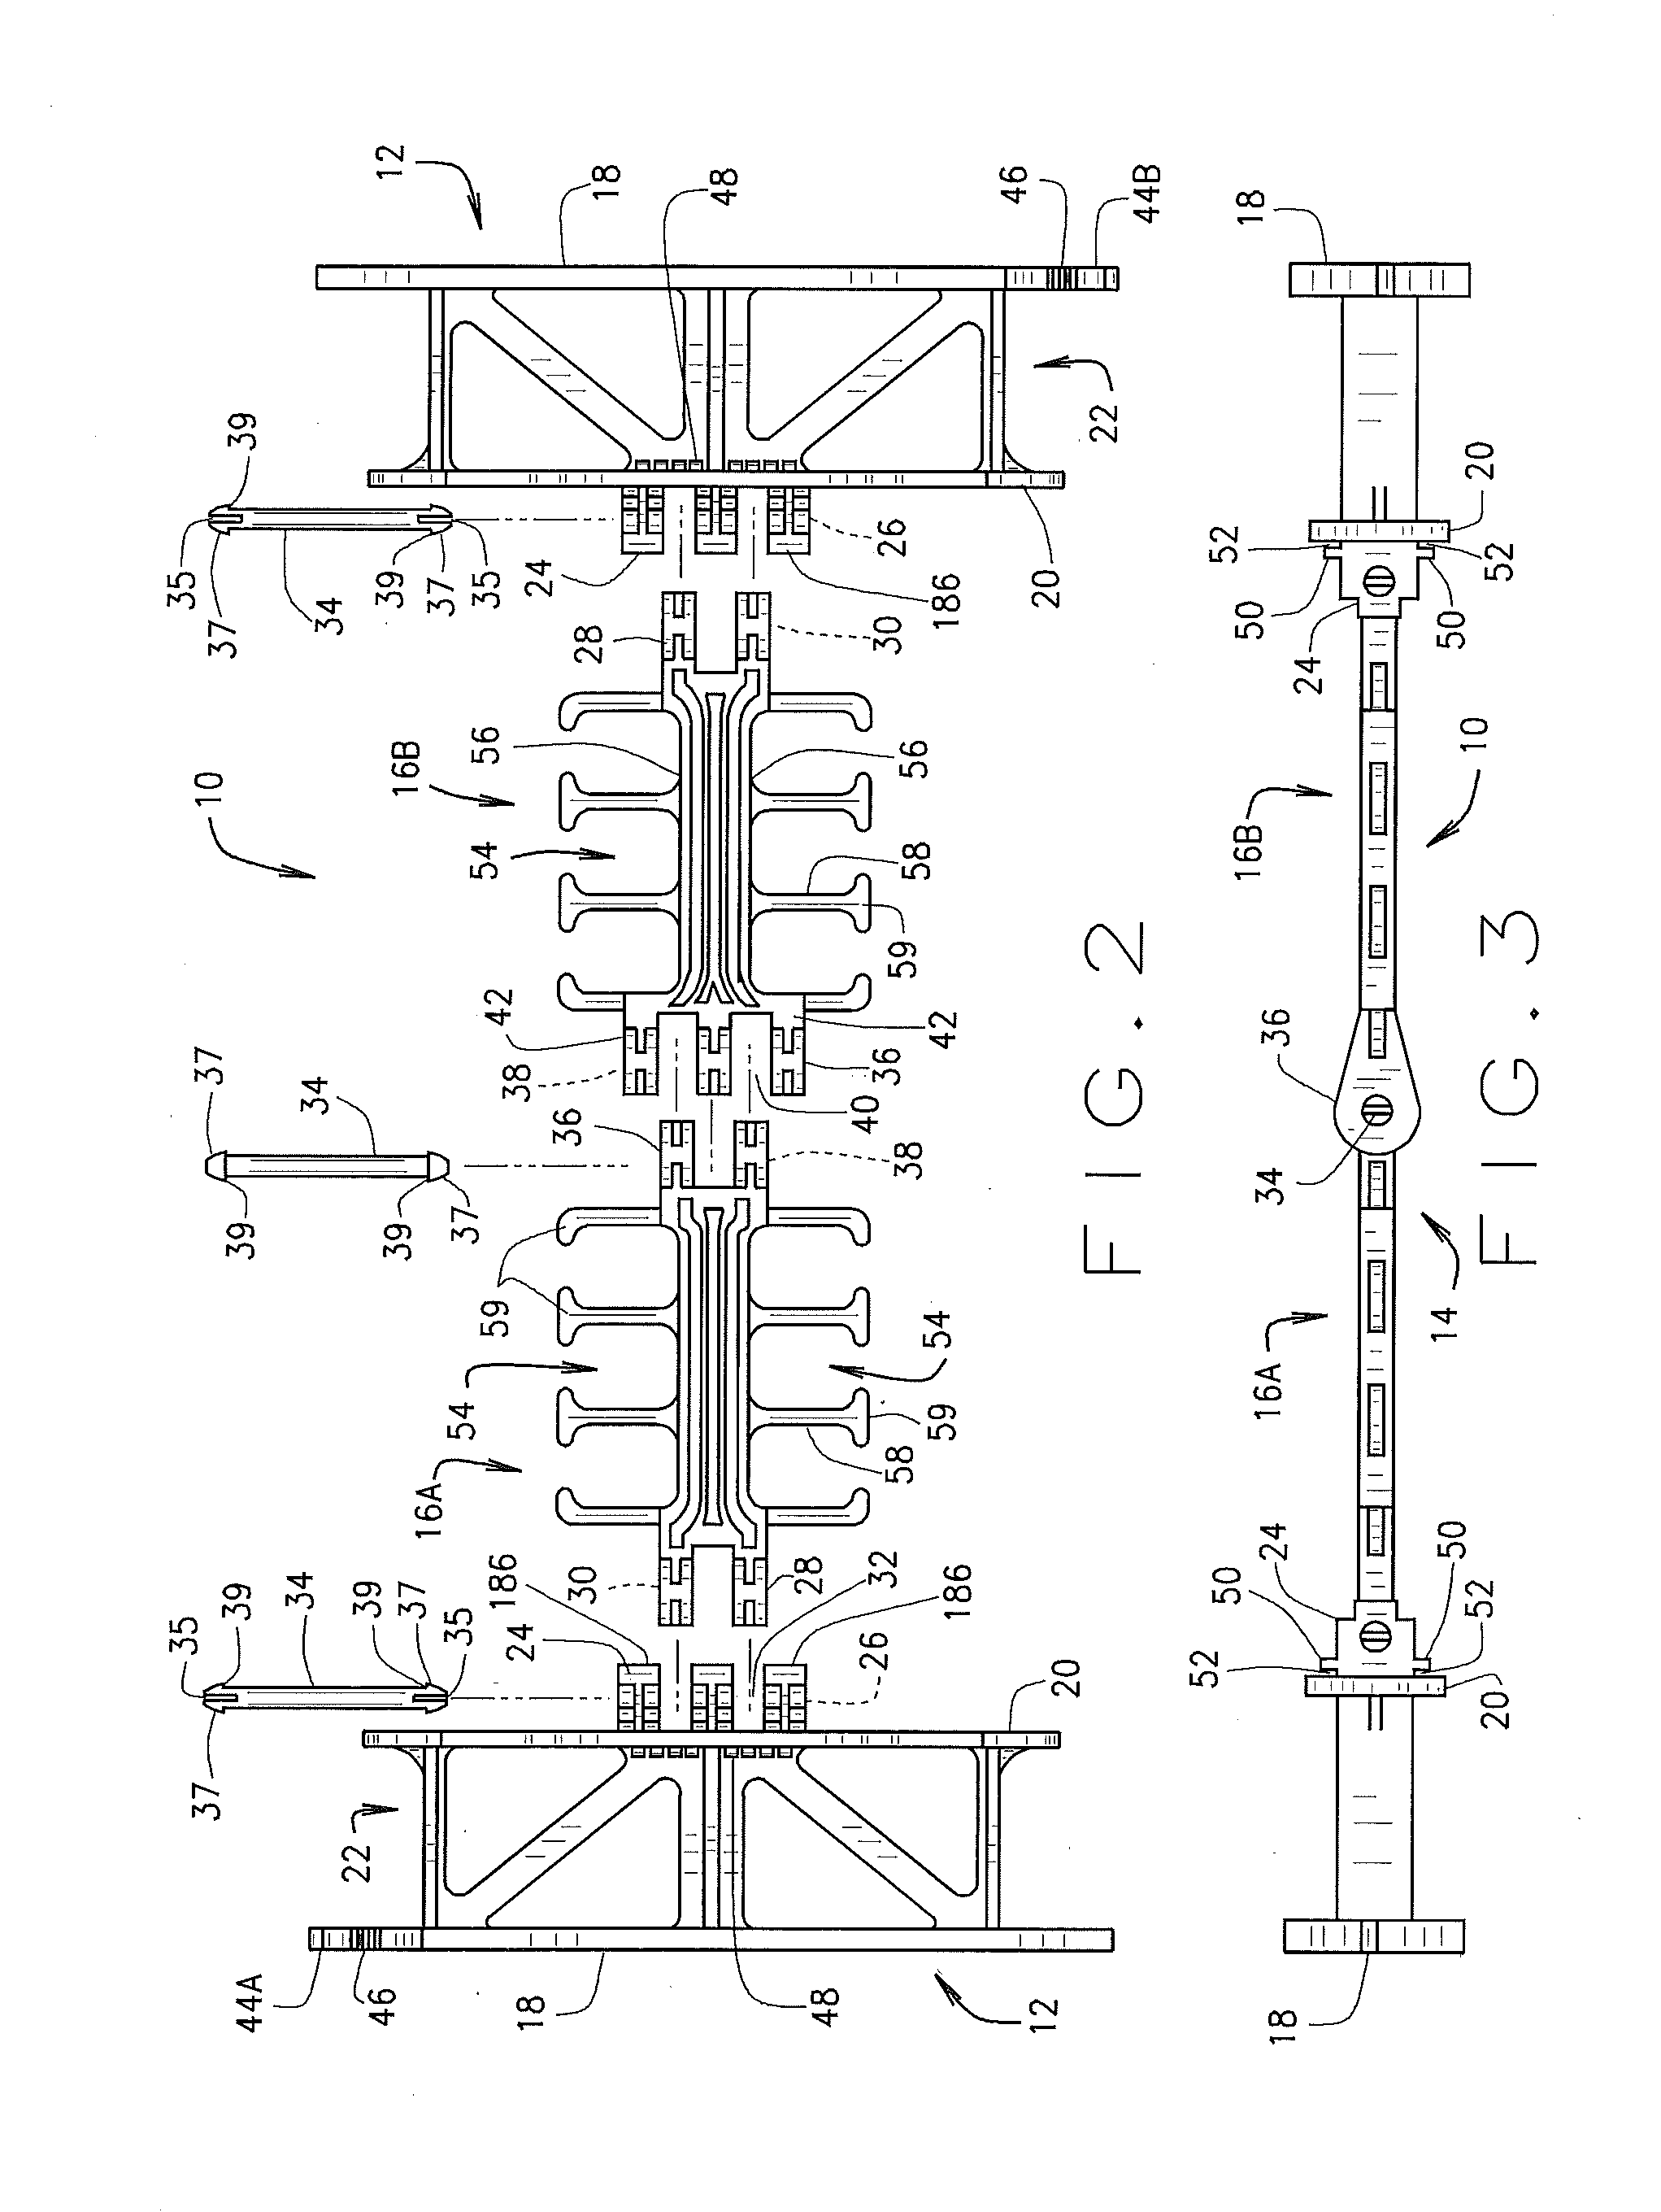 Insulating concrete form (ICF) system with tie member modularity